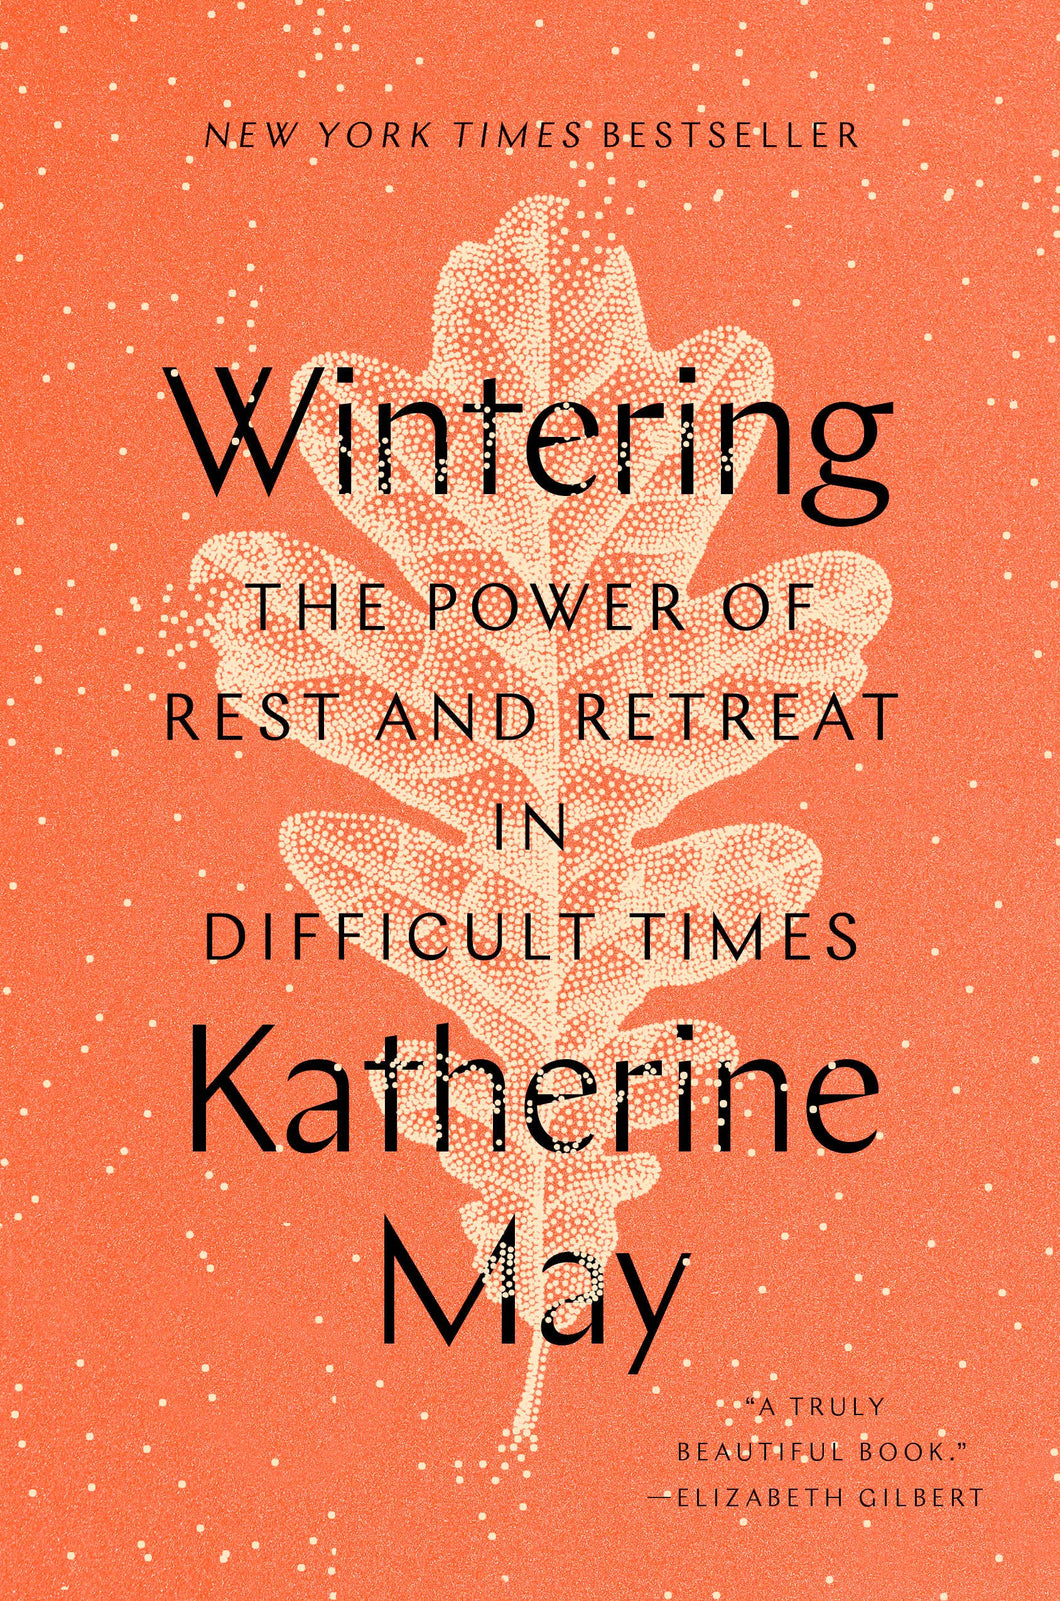 Wintering: The Power Of Rest And Retreat In Difficult Times [Katherine May]